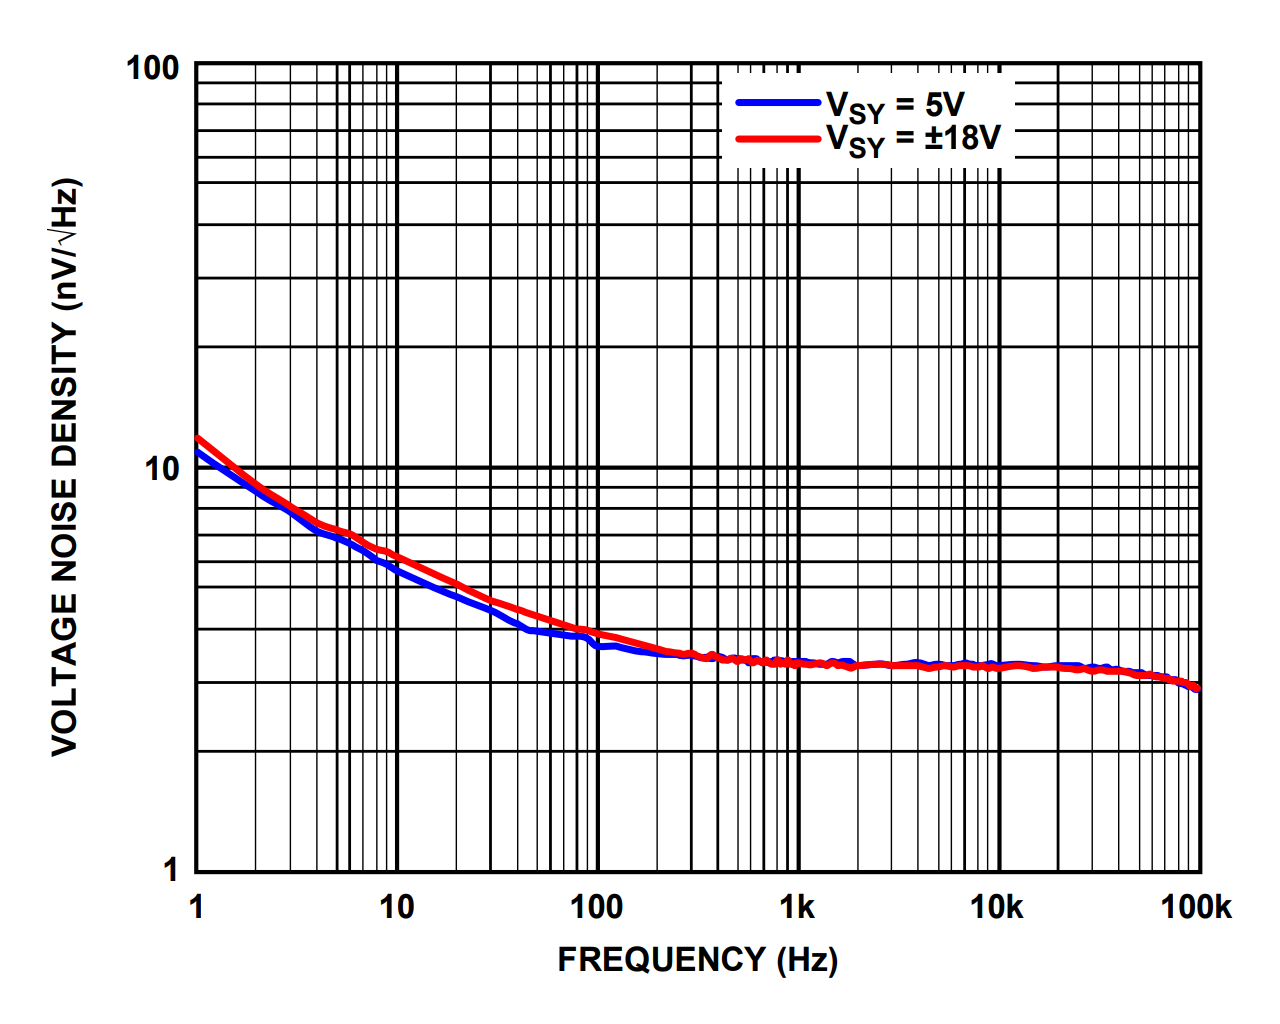 A typical noise plot from an opamp datasheet showing two curves linearly decreasing in log-log space up to a point where they become horizontal. The two curves represent the voltage noise density for different supply voltages.